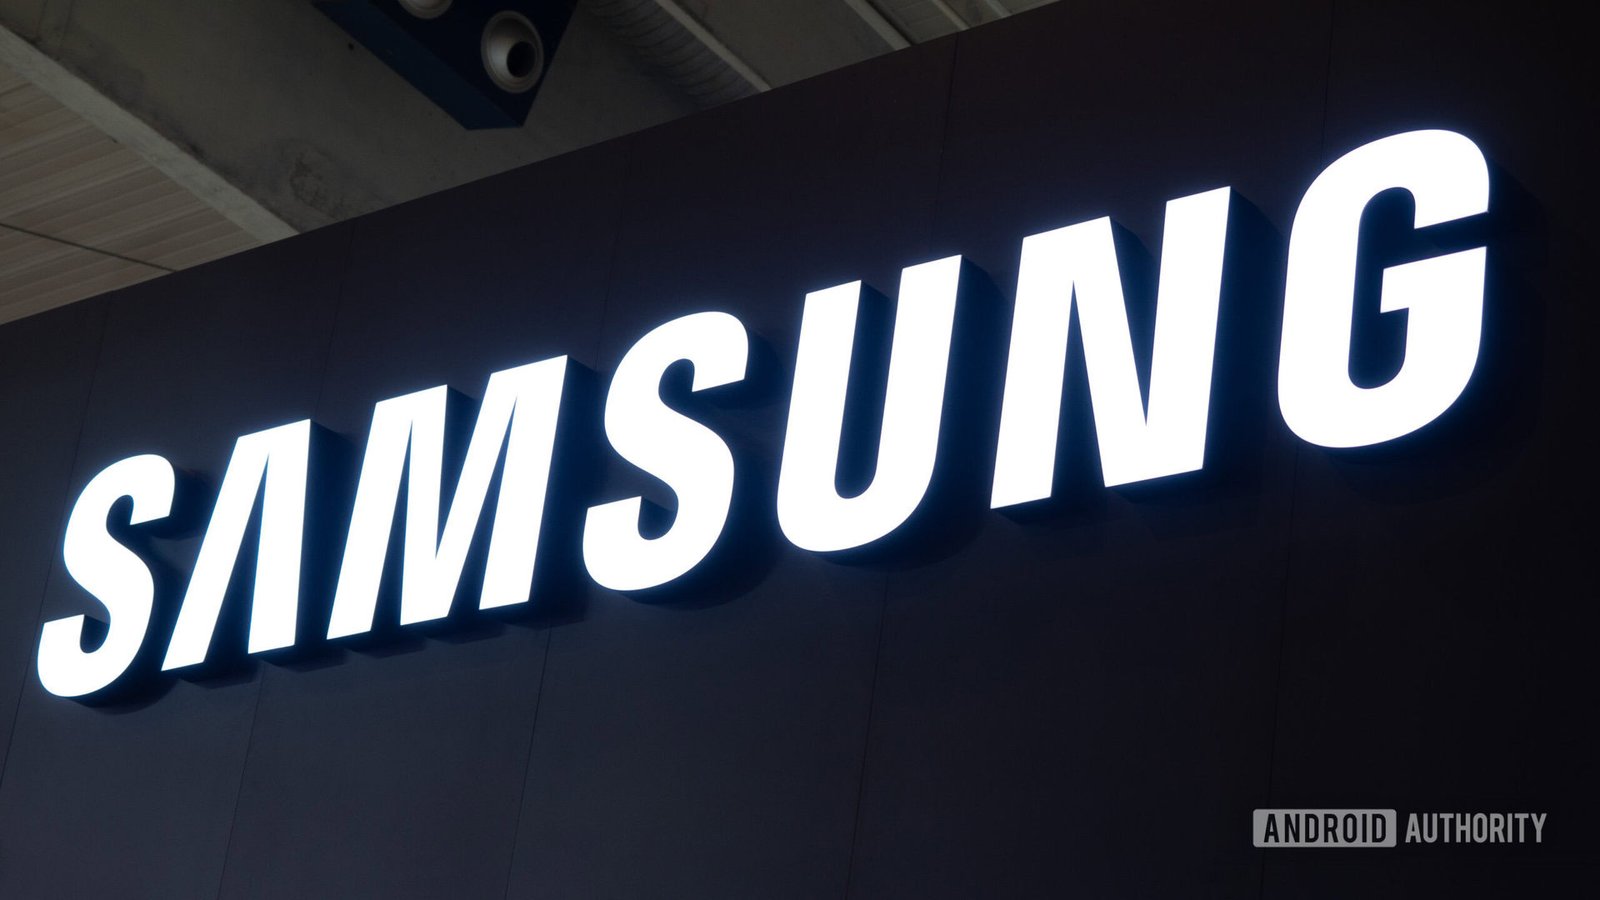 Samsung Unpacked leak may have spoiled everything planned for the event